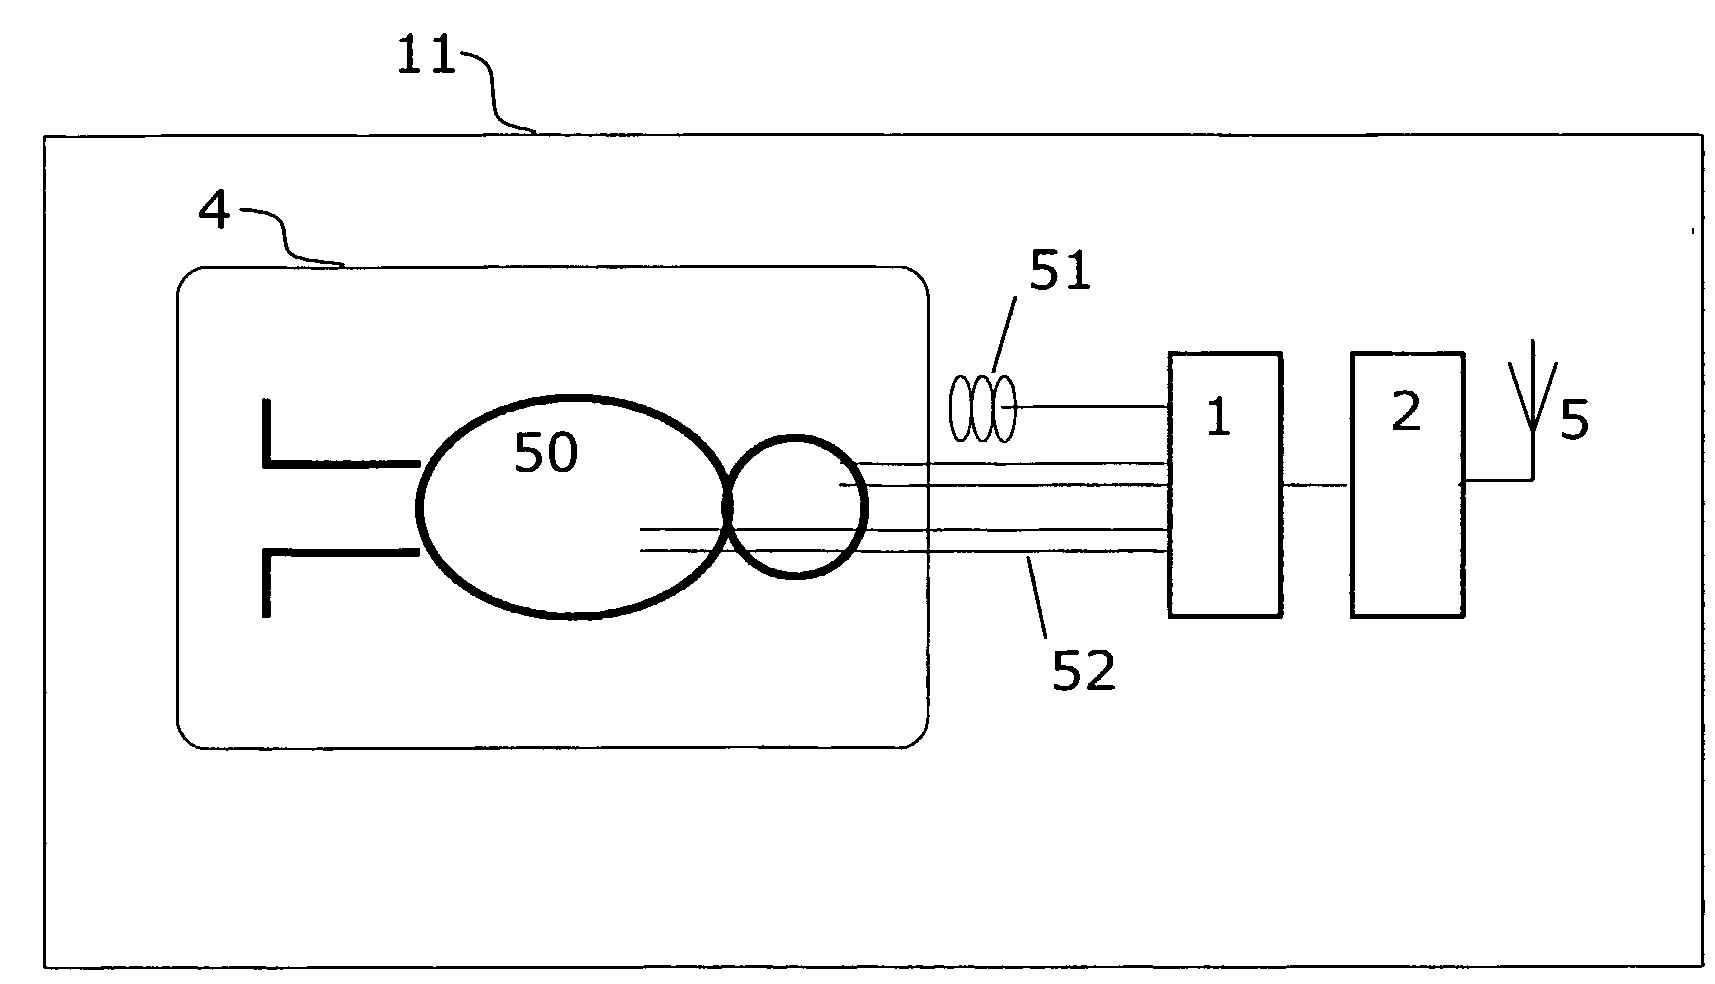 Encoding and transmission of signals as RF signals for detection using an mr apparatus